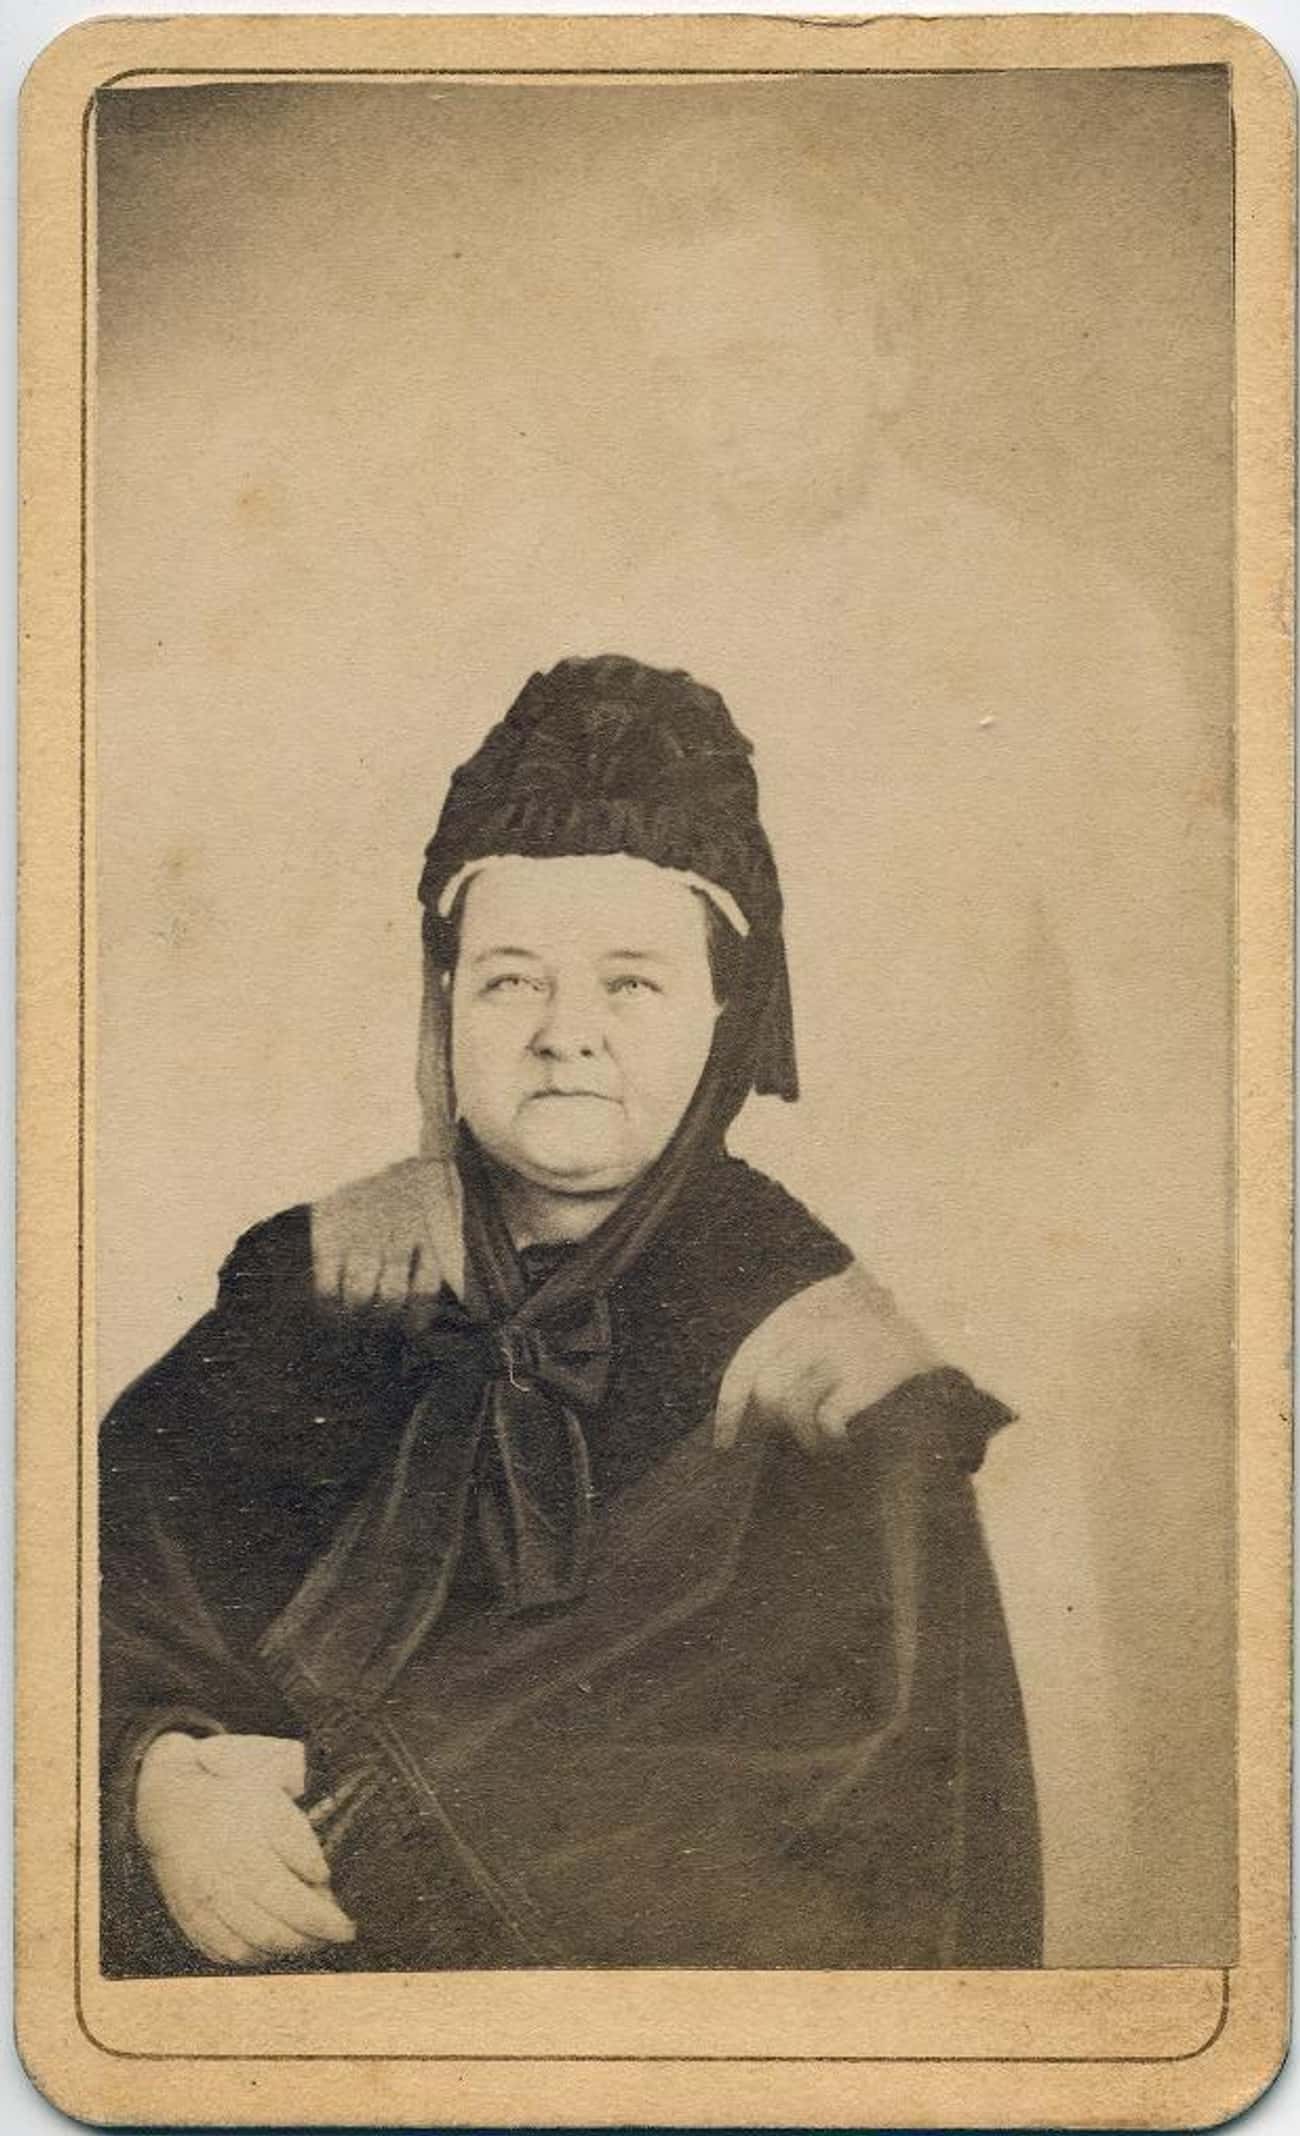 Mumler Photographed Mary Todd Lincoln With Abe's Ghost